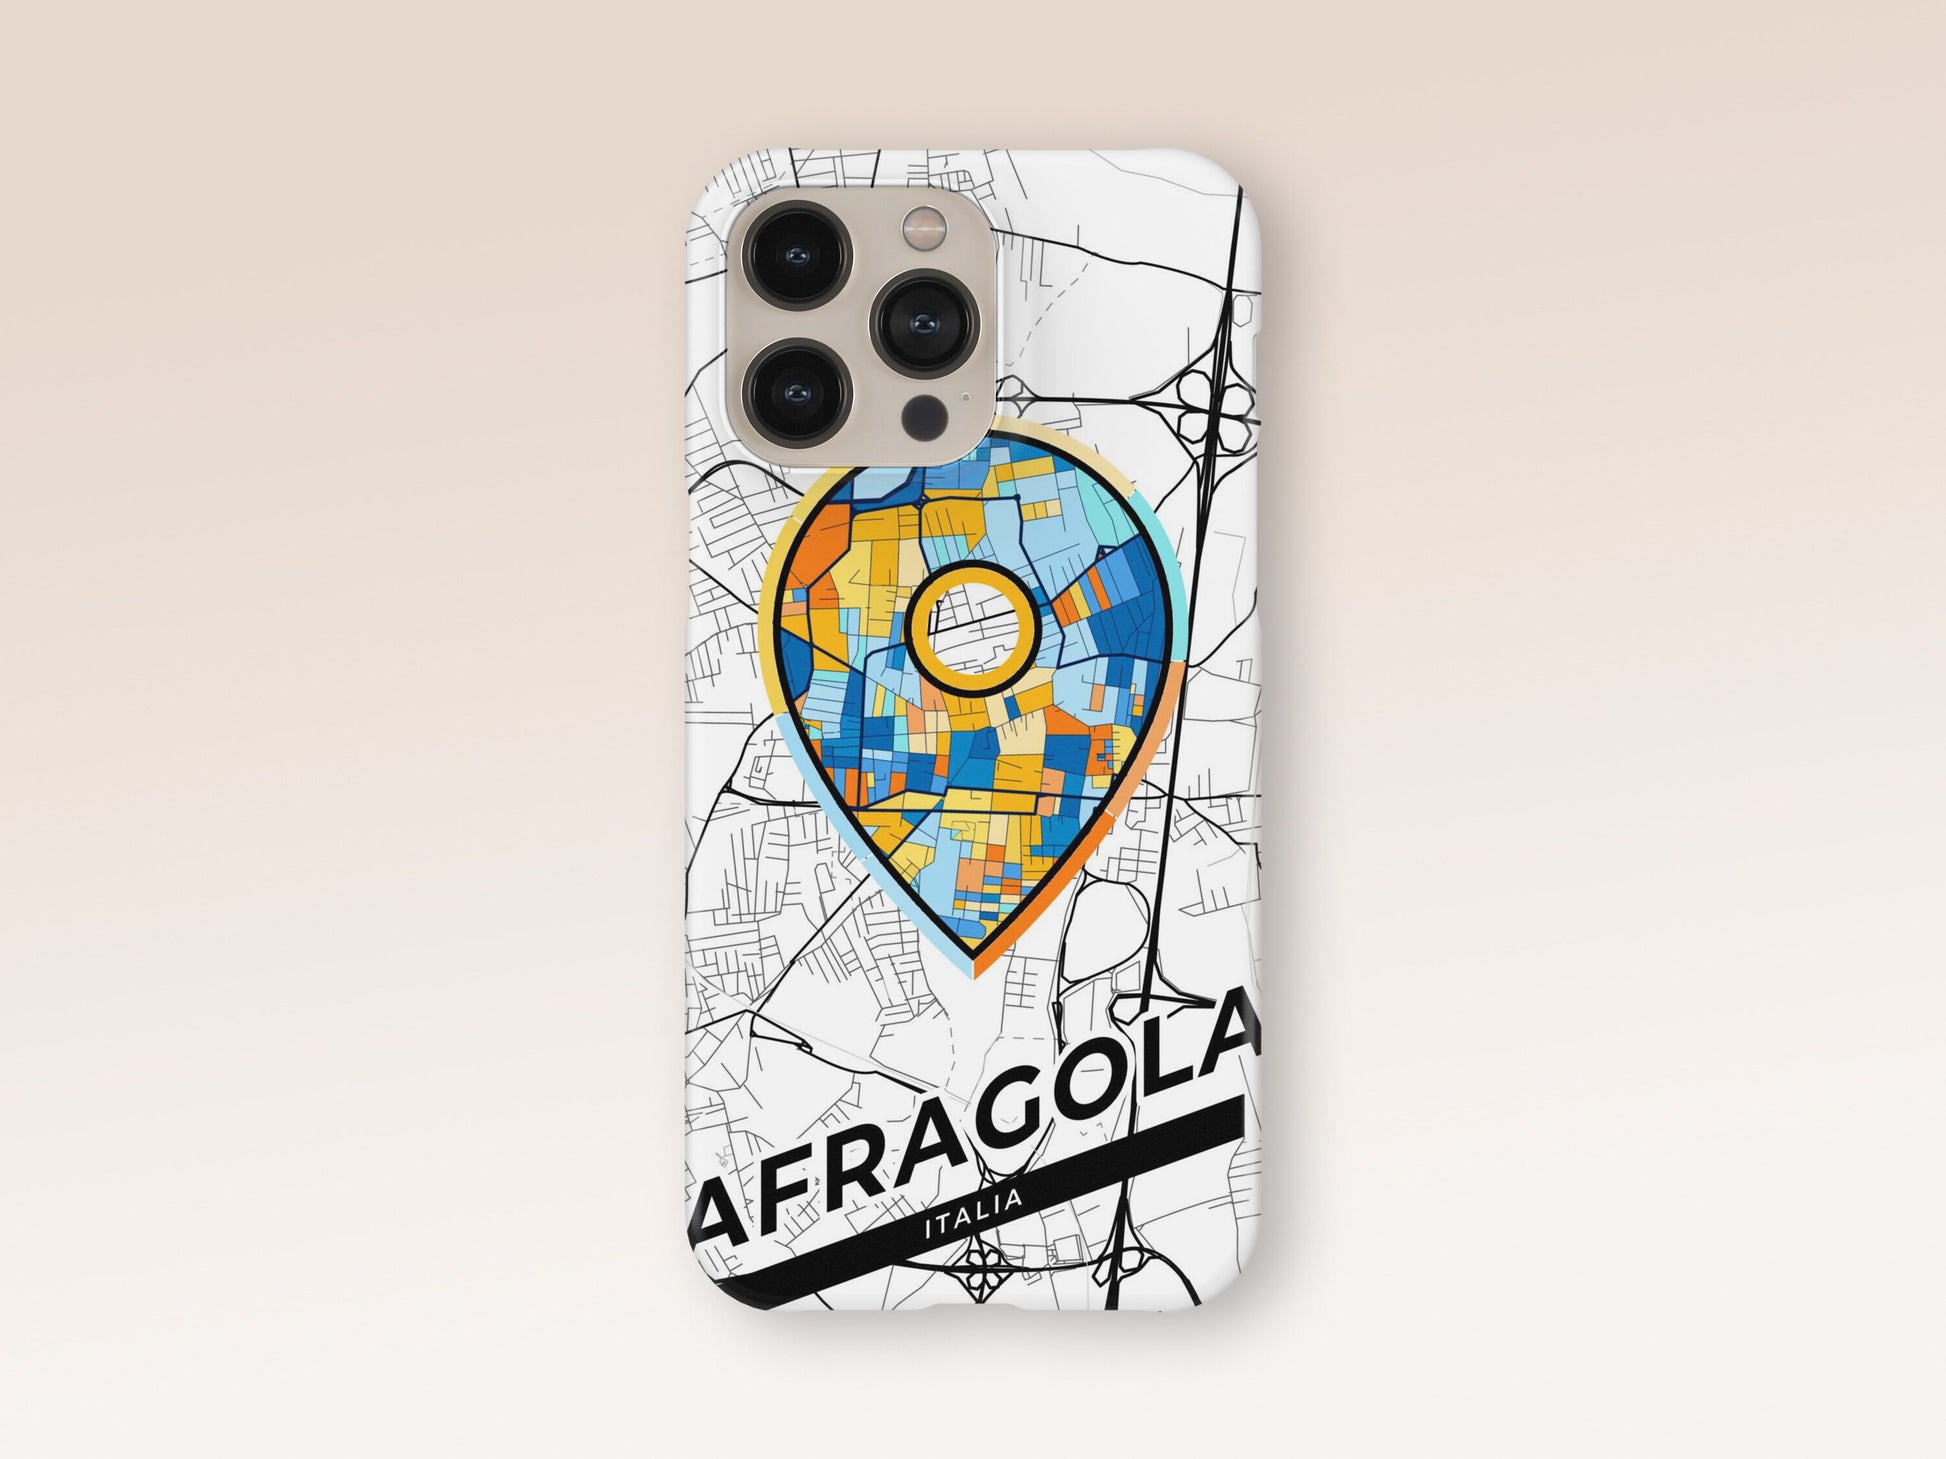 Afragola Italy slim phone case with colorful icon. Birthday, wedding or housewarming gift. Couple match cases. 1